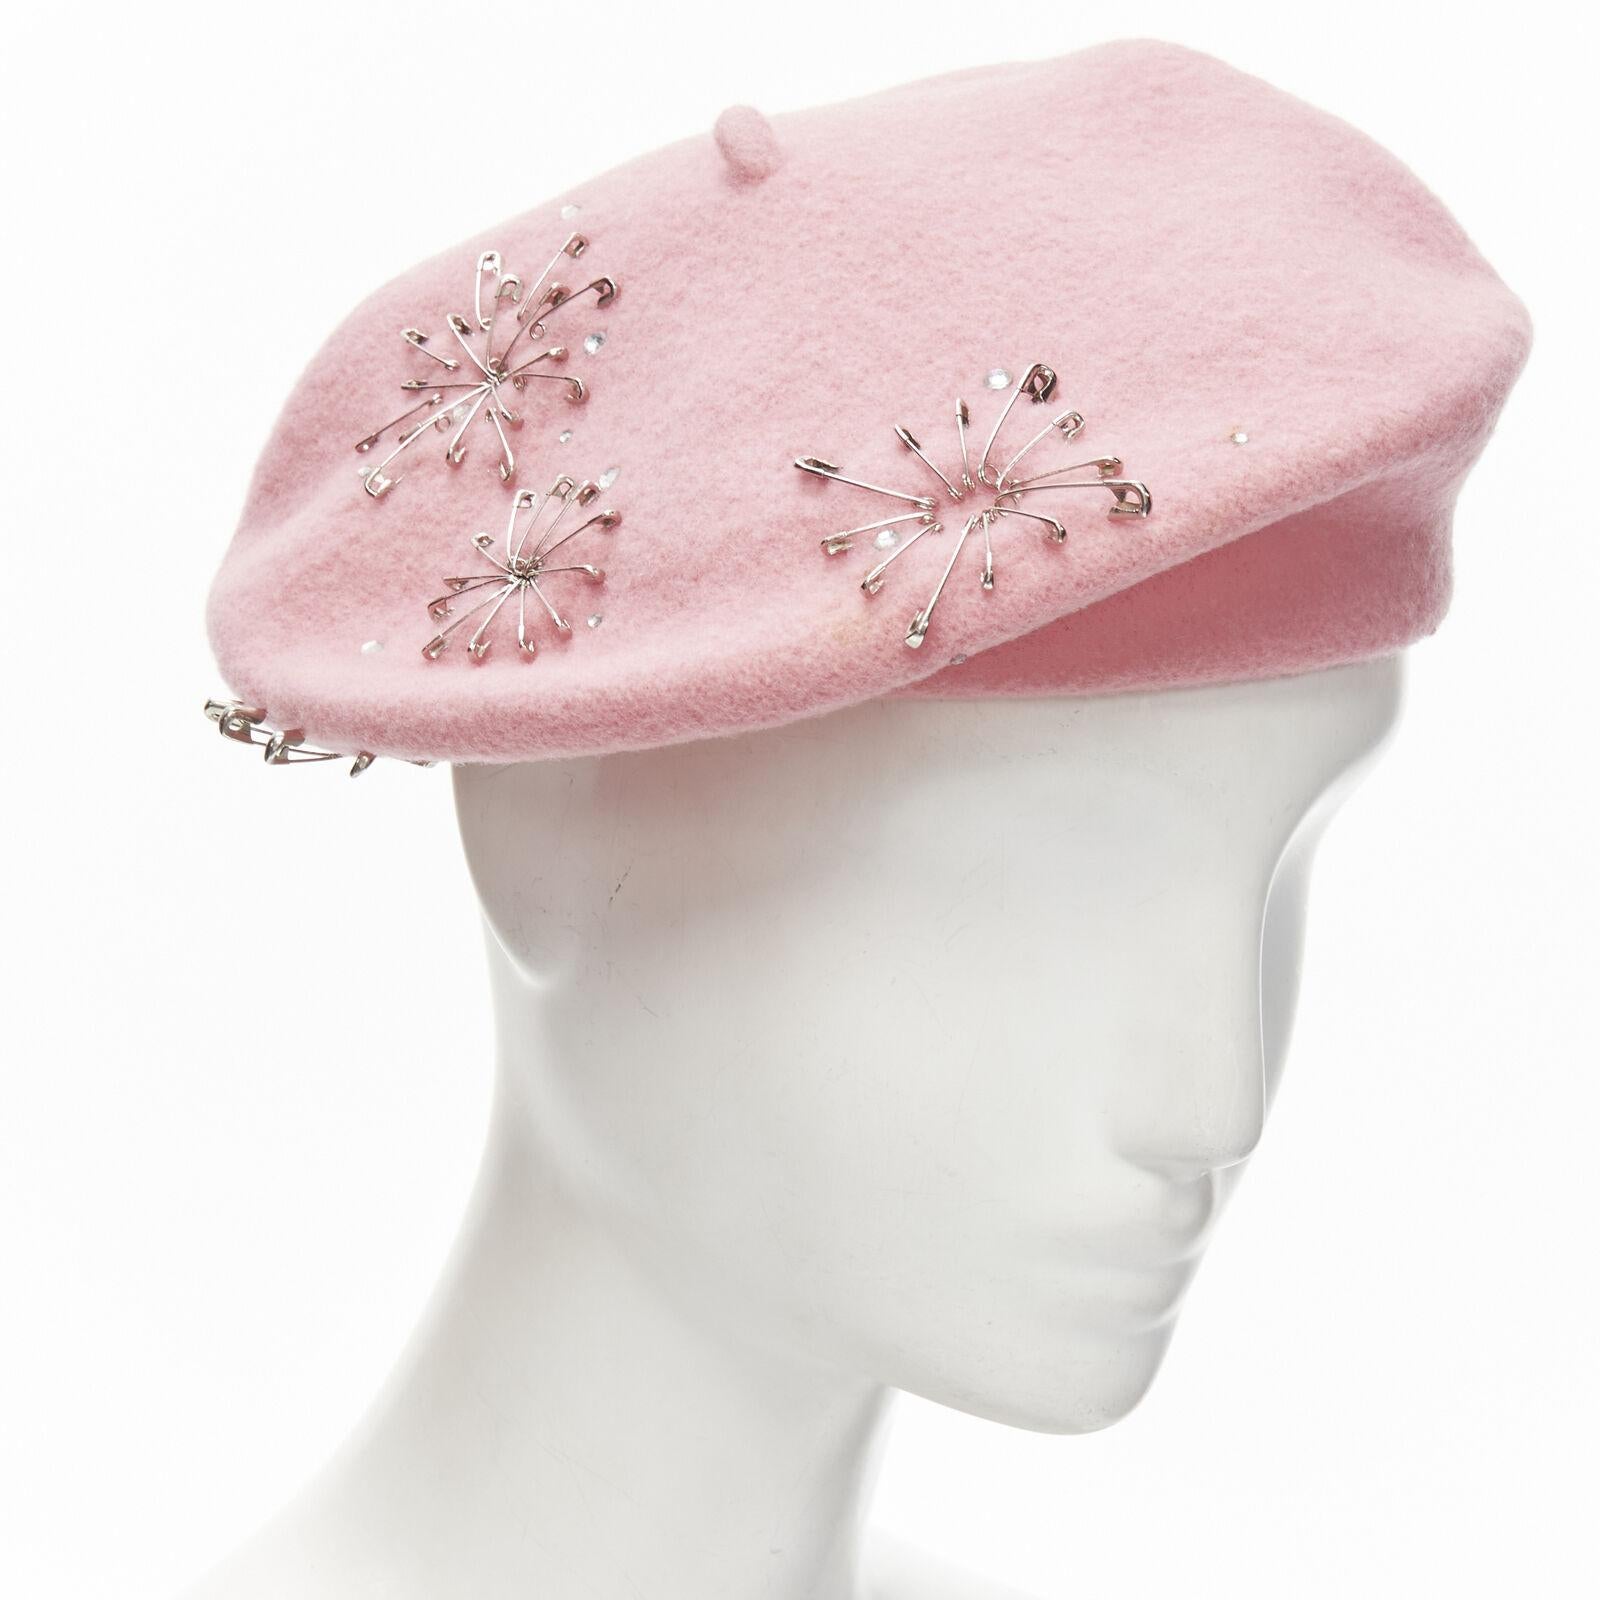 new MISS JONES Stephen Jones Pins candy pink wool safety pin crystal beret hat For Sale 2